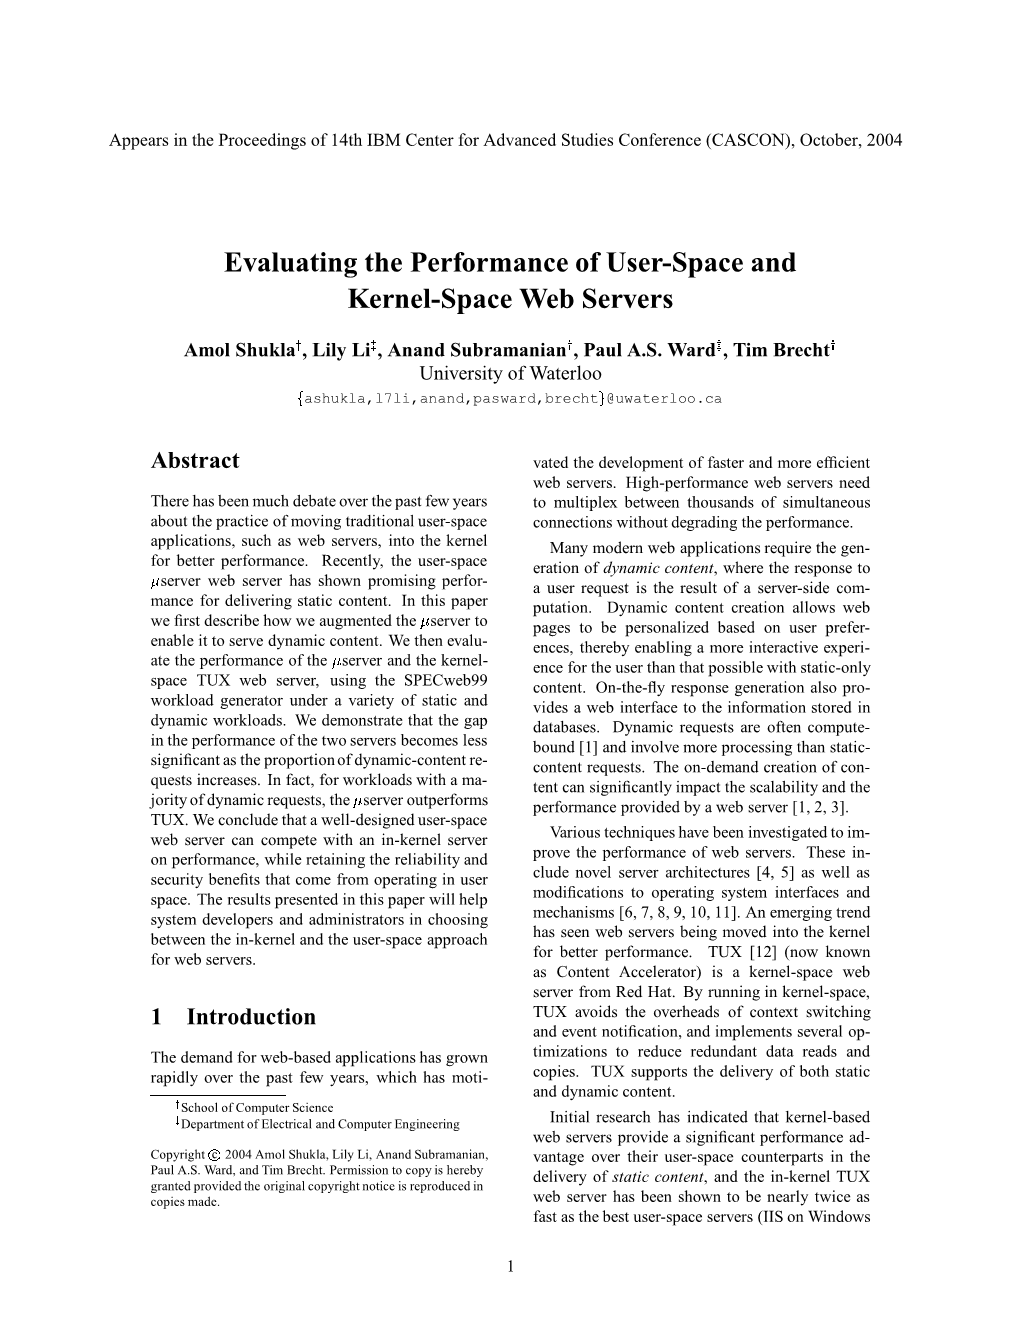 Evaluating the Performance of User-Space and Kernel-Space Web Servers